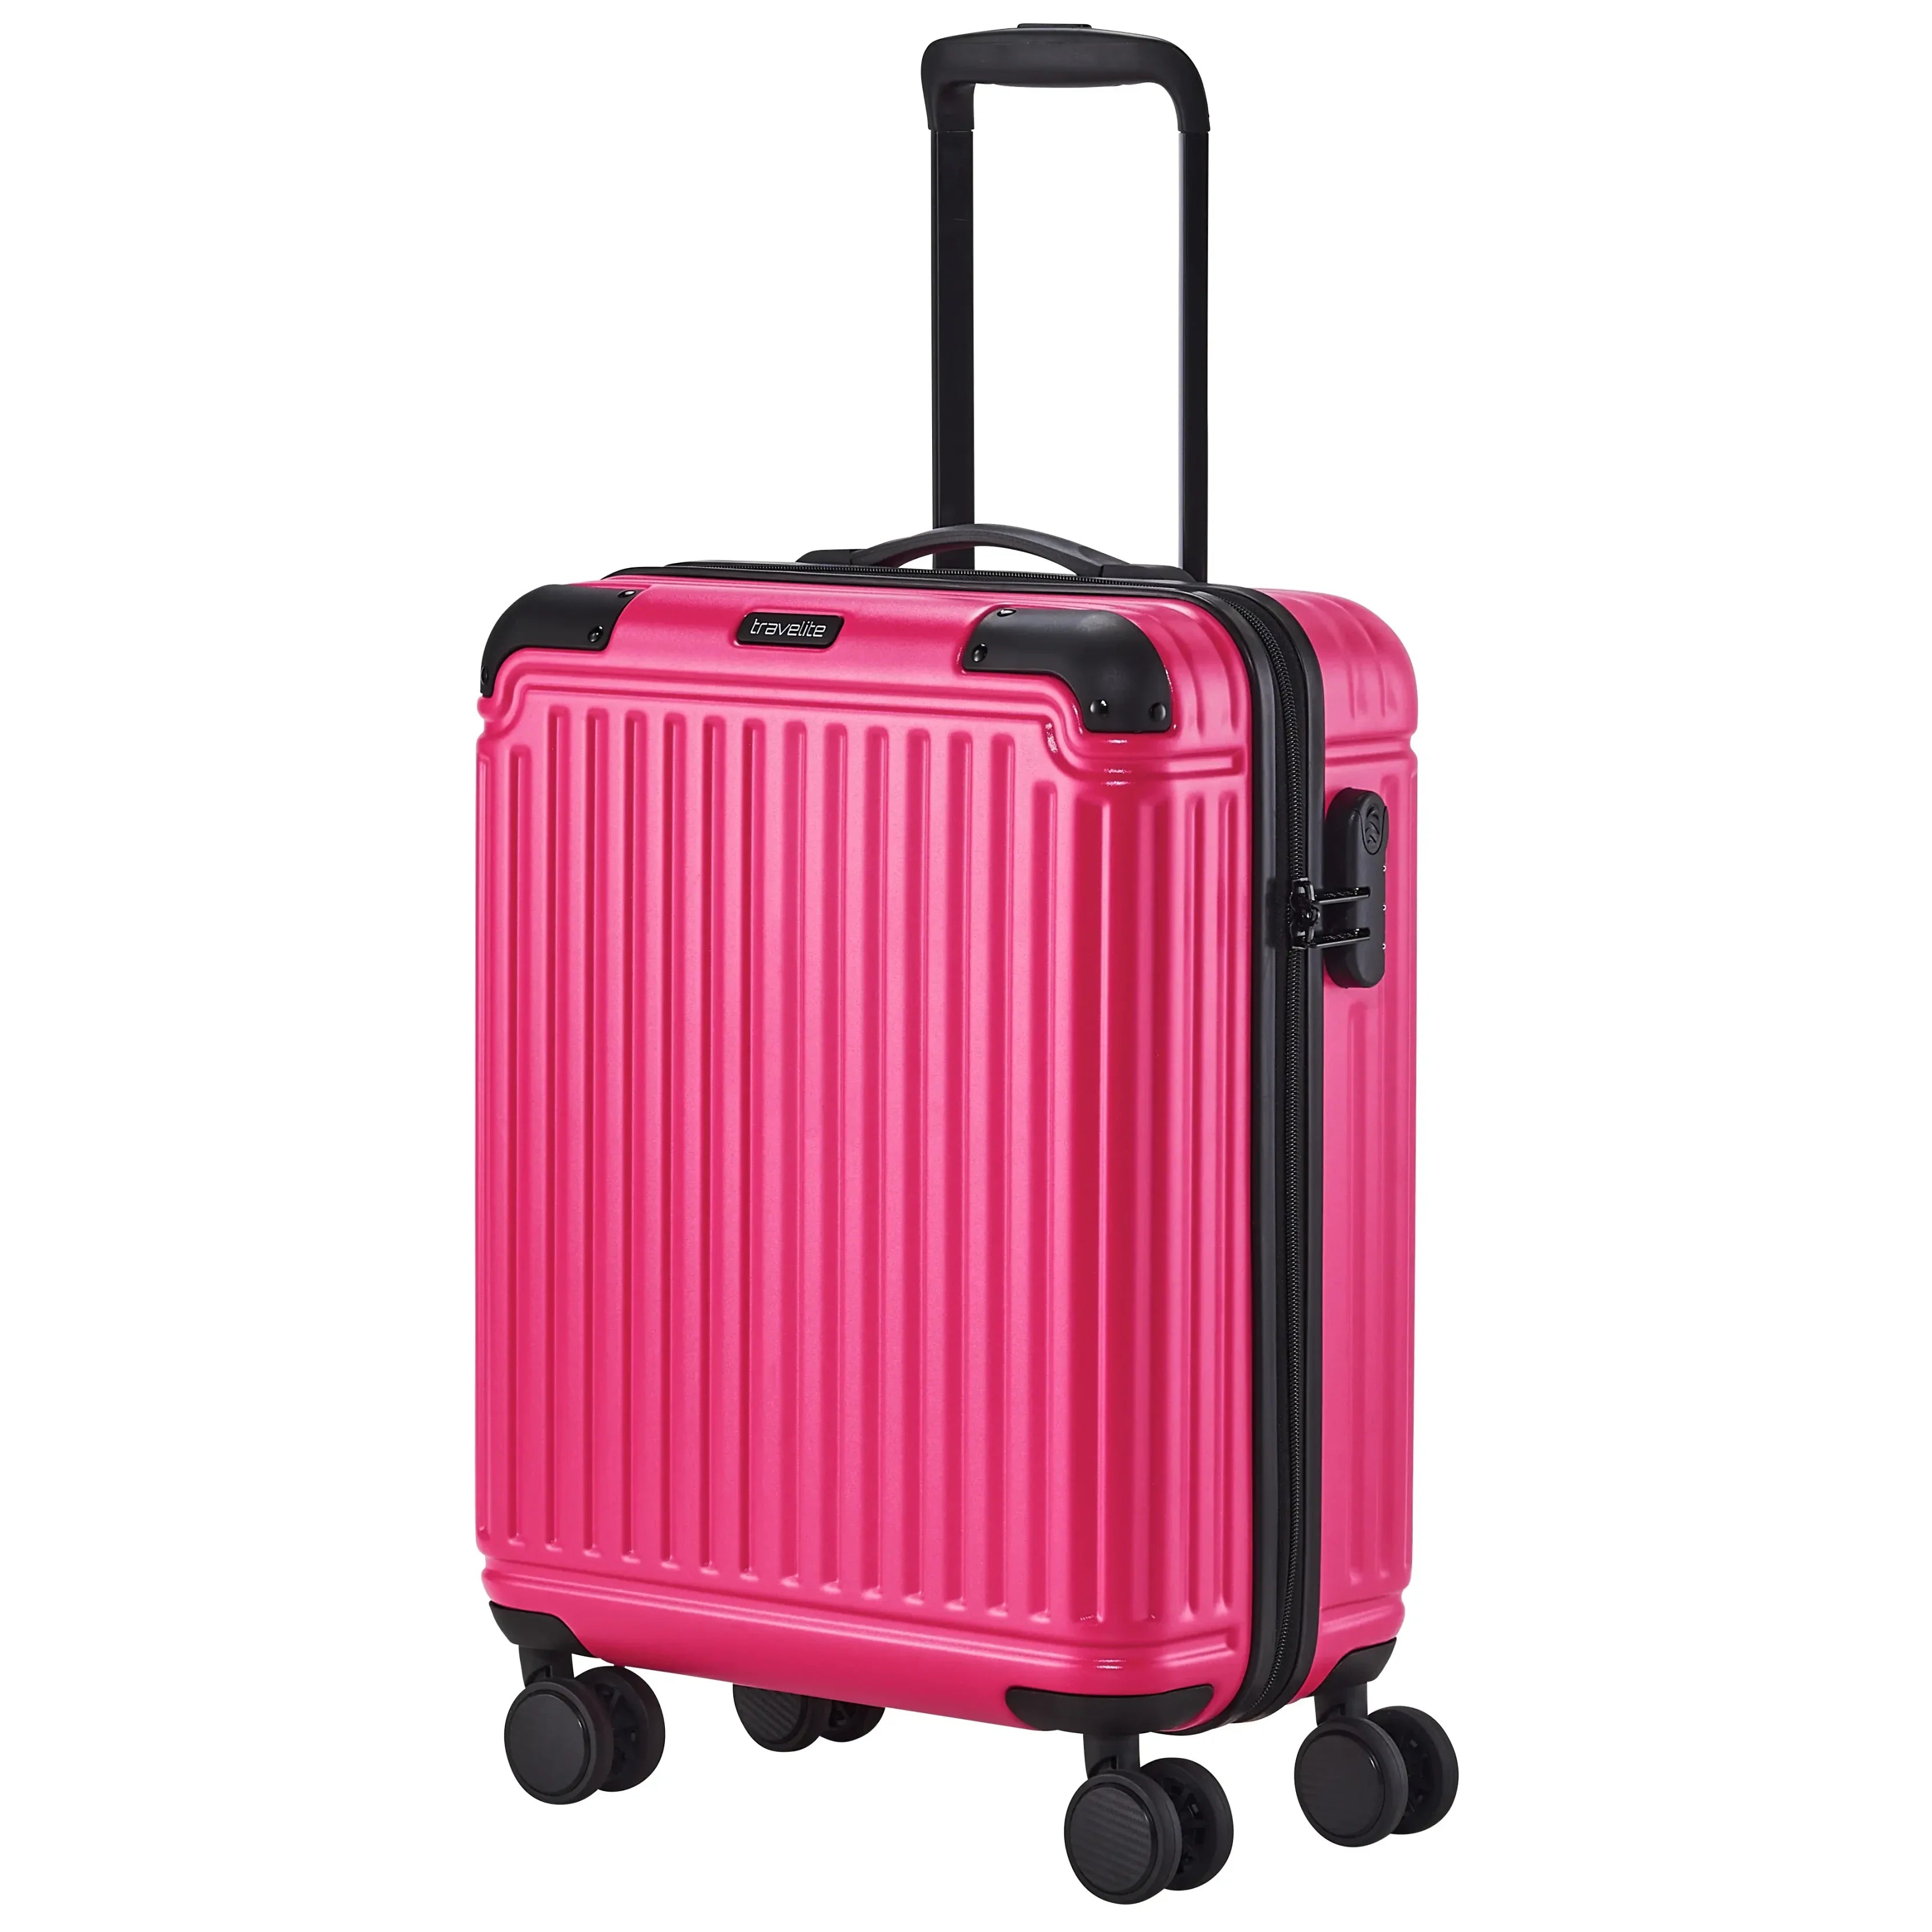 Travelite Cruise trolley 4 roues 55 cm - rose